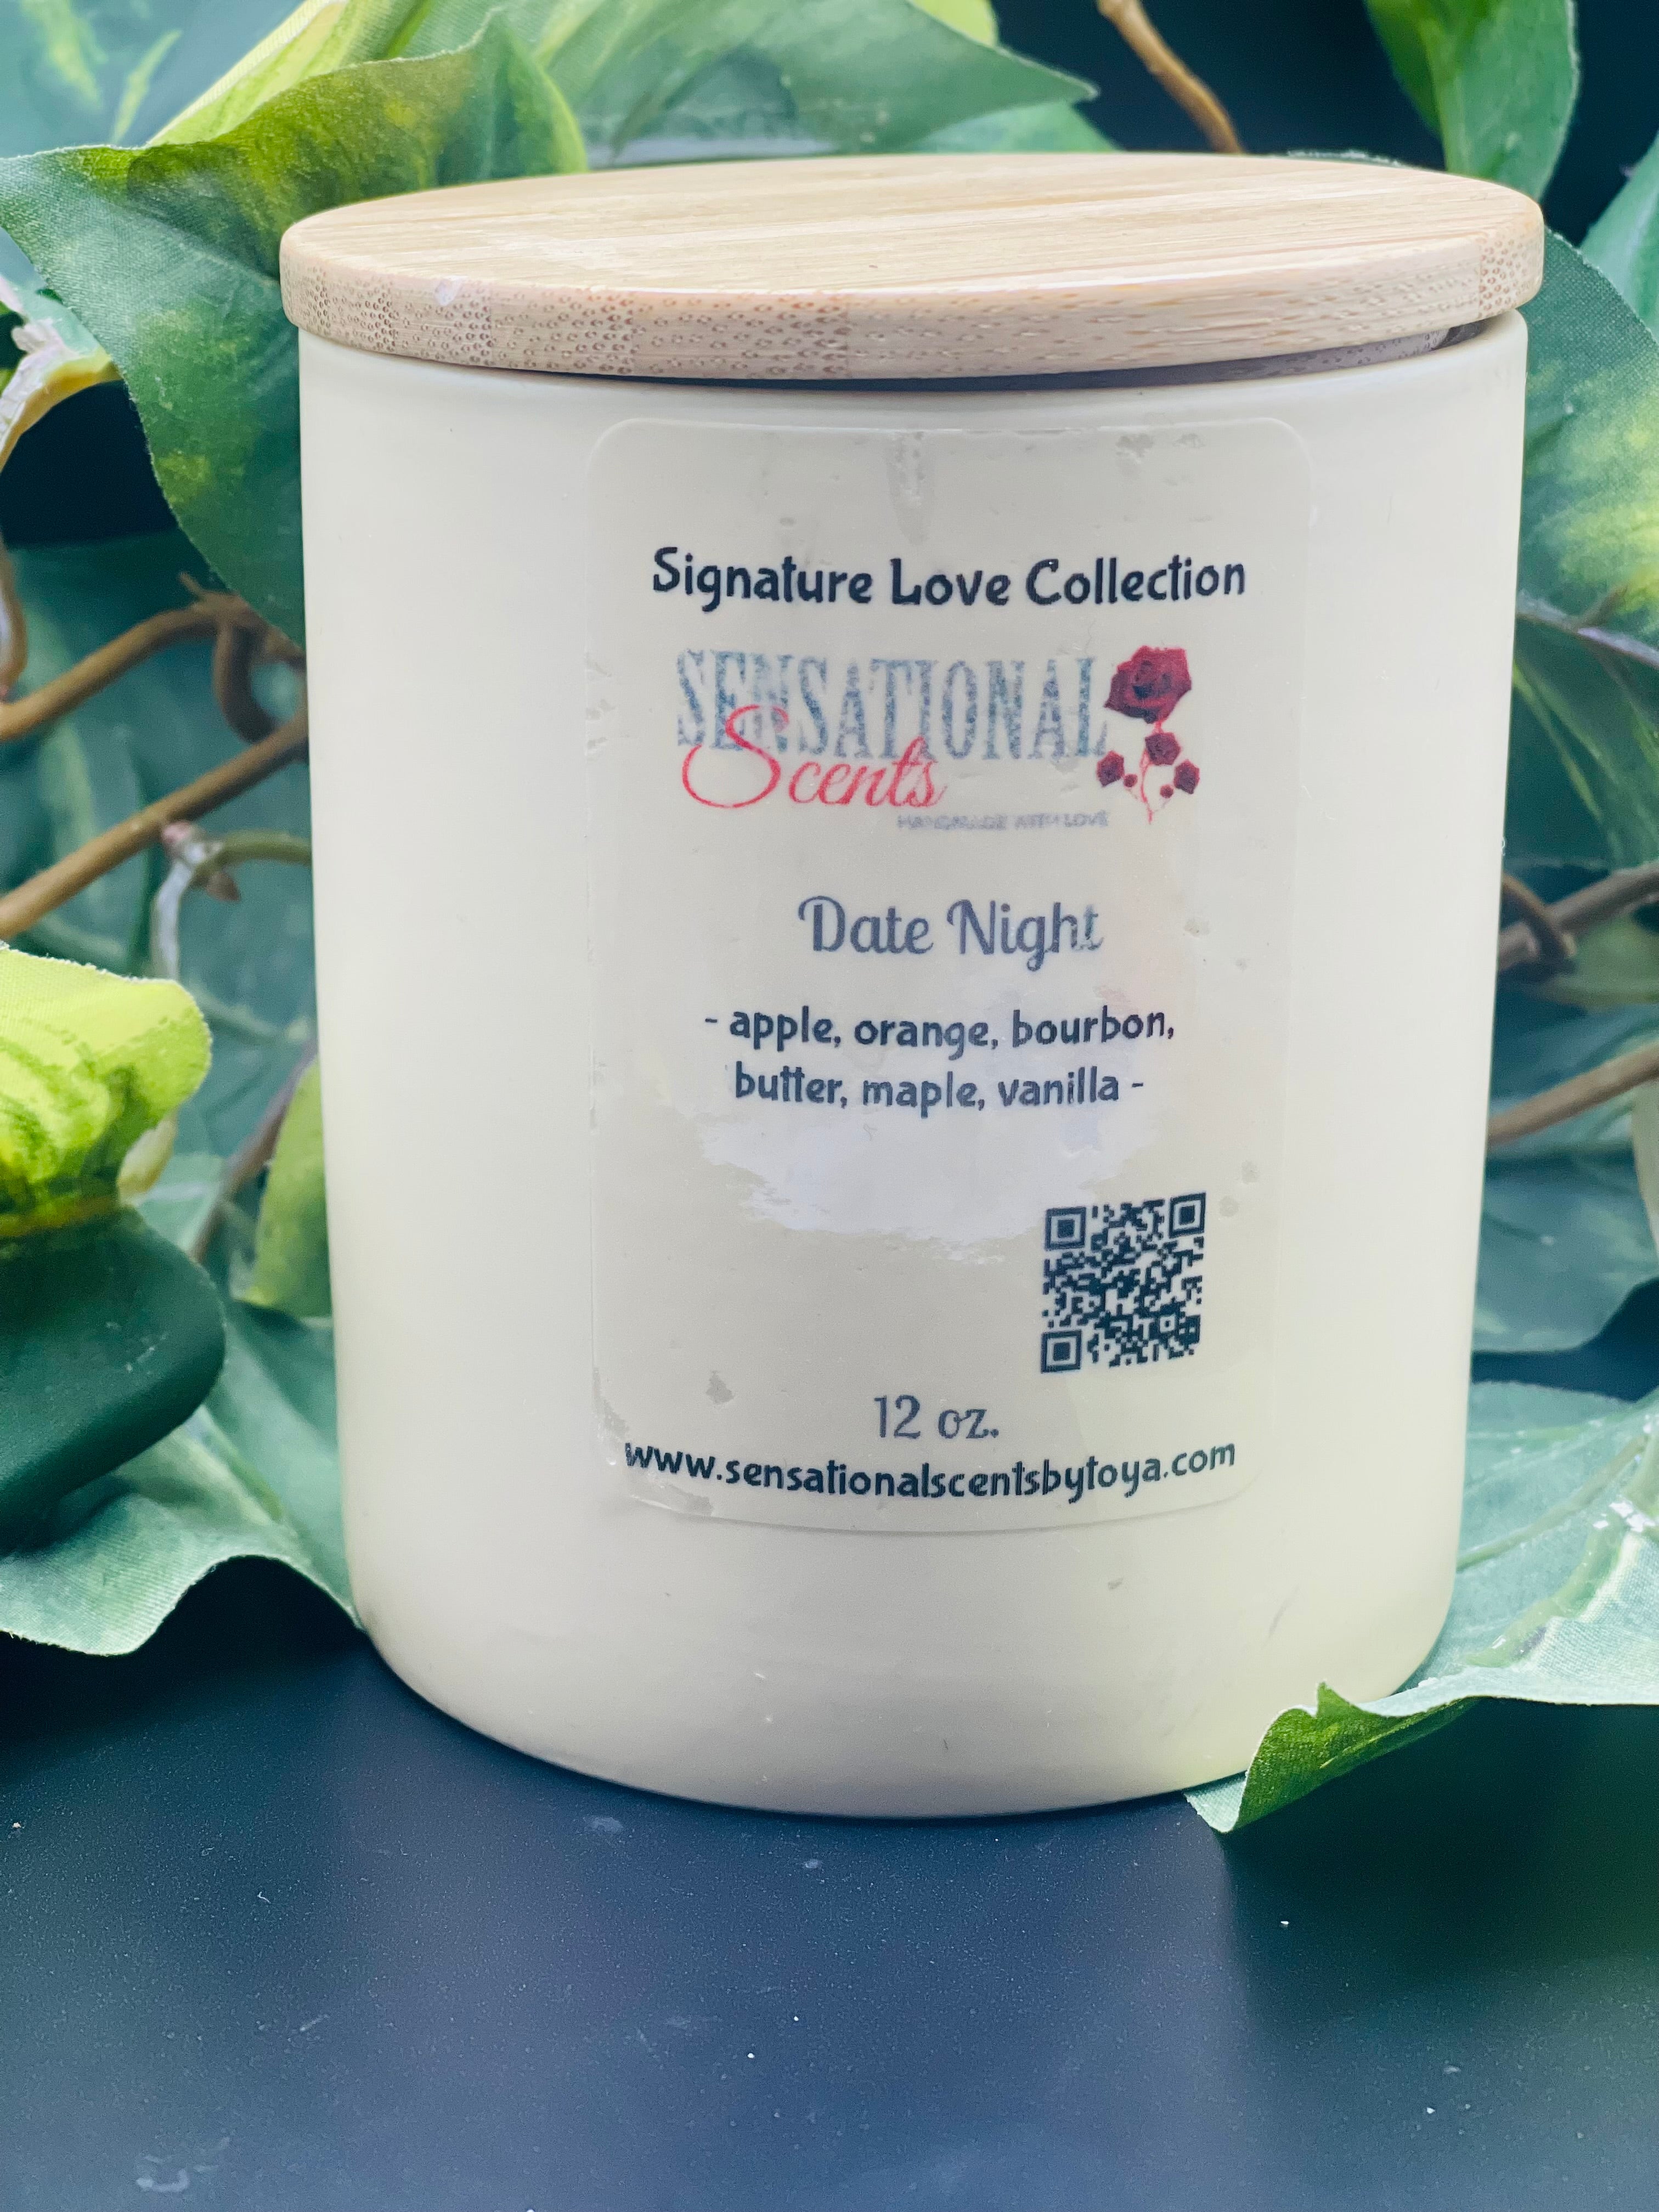 Date Night Scented Candle